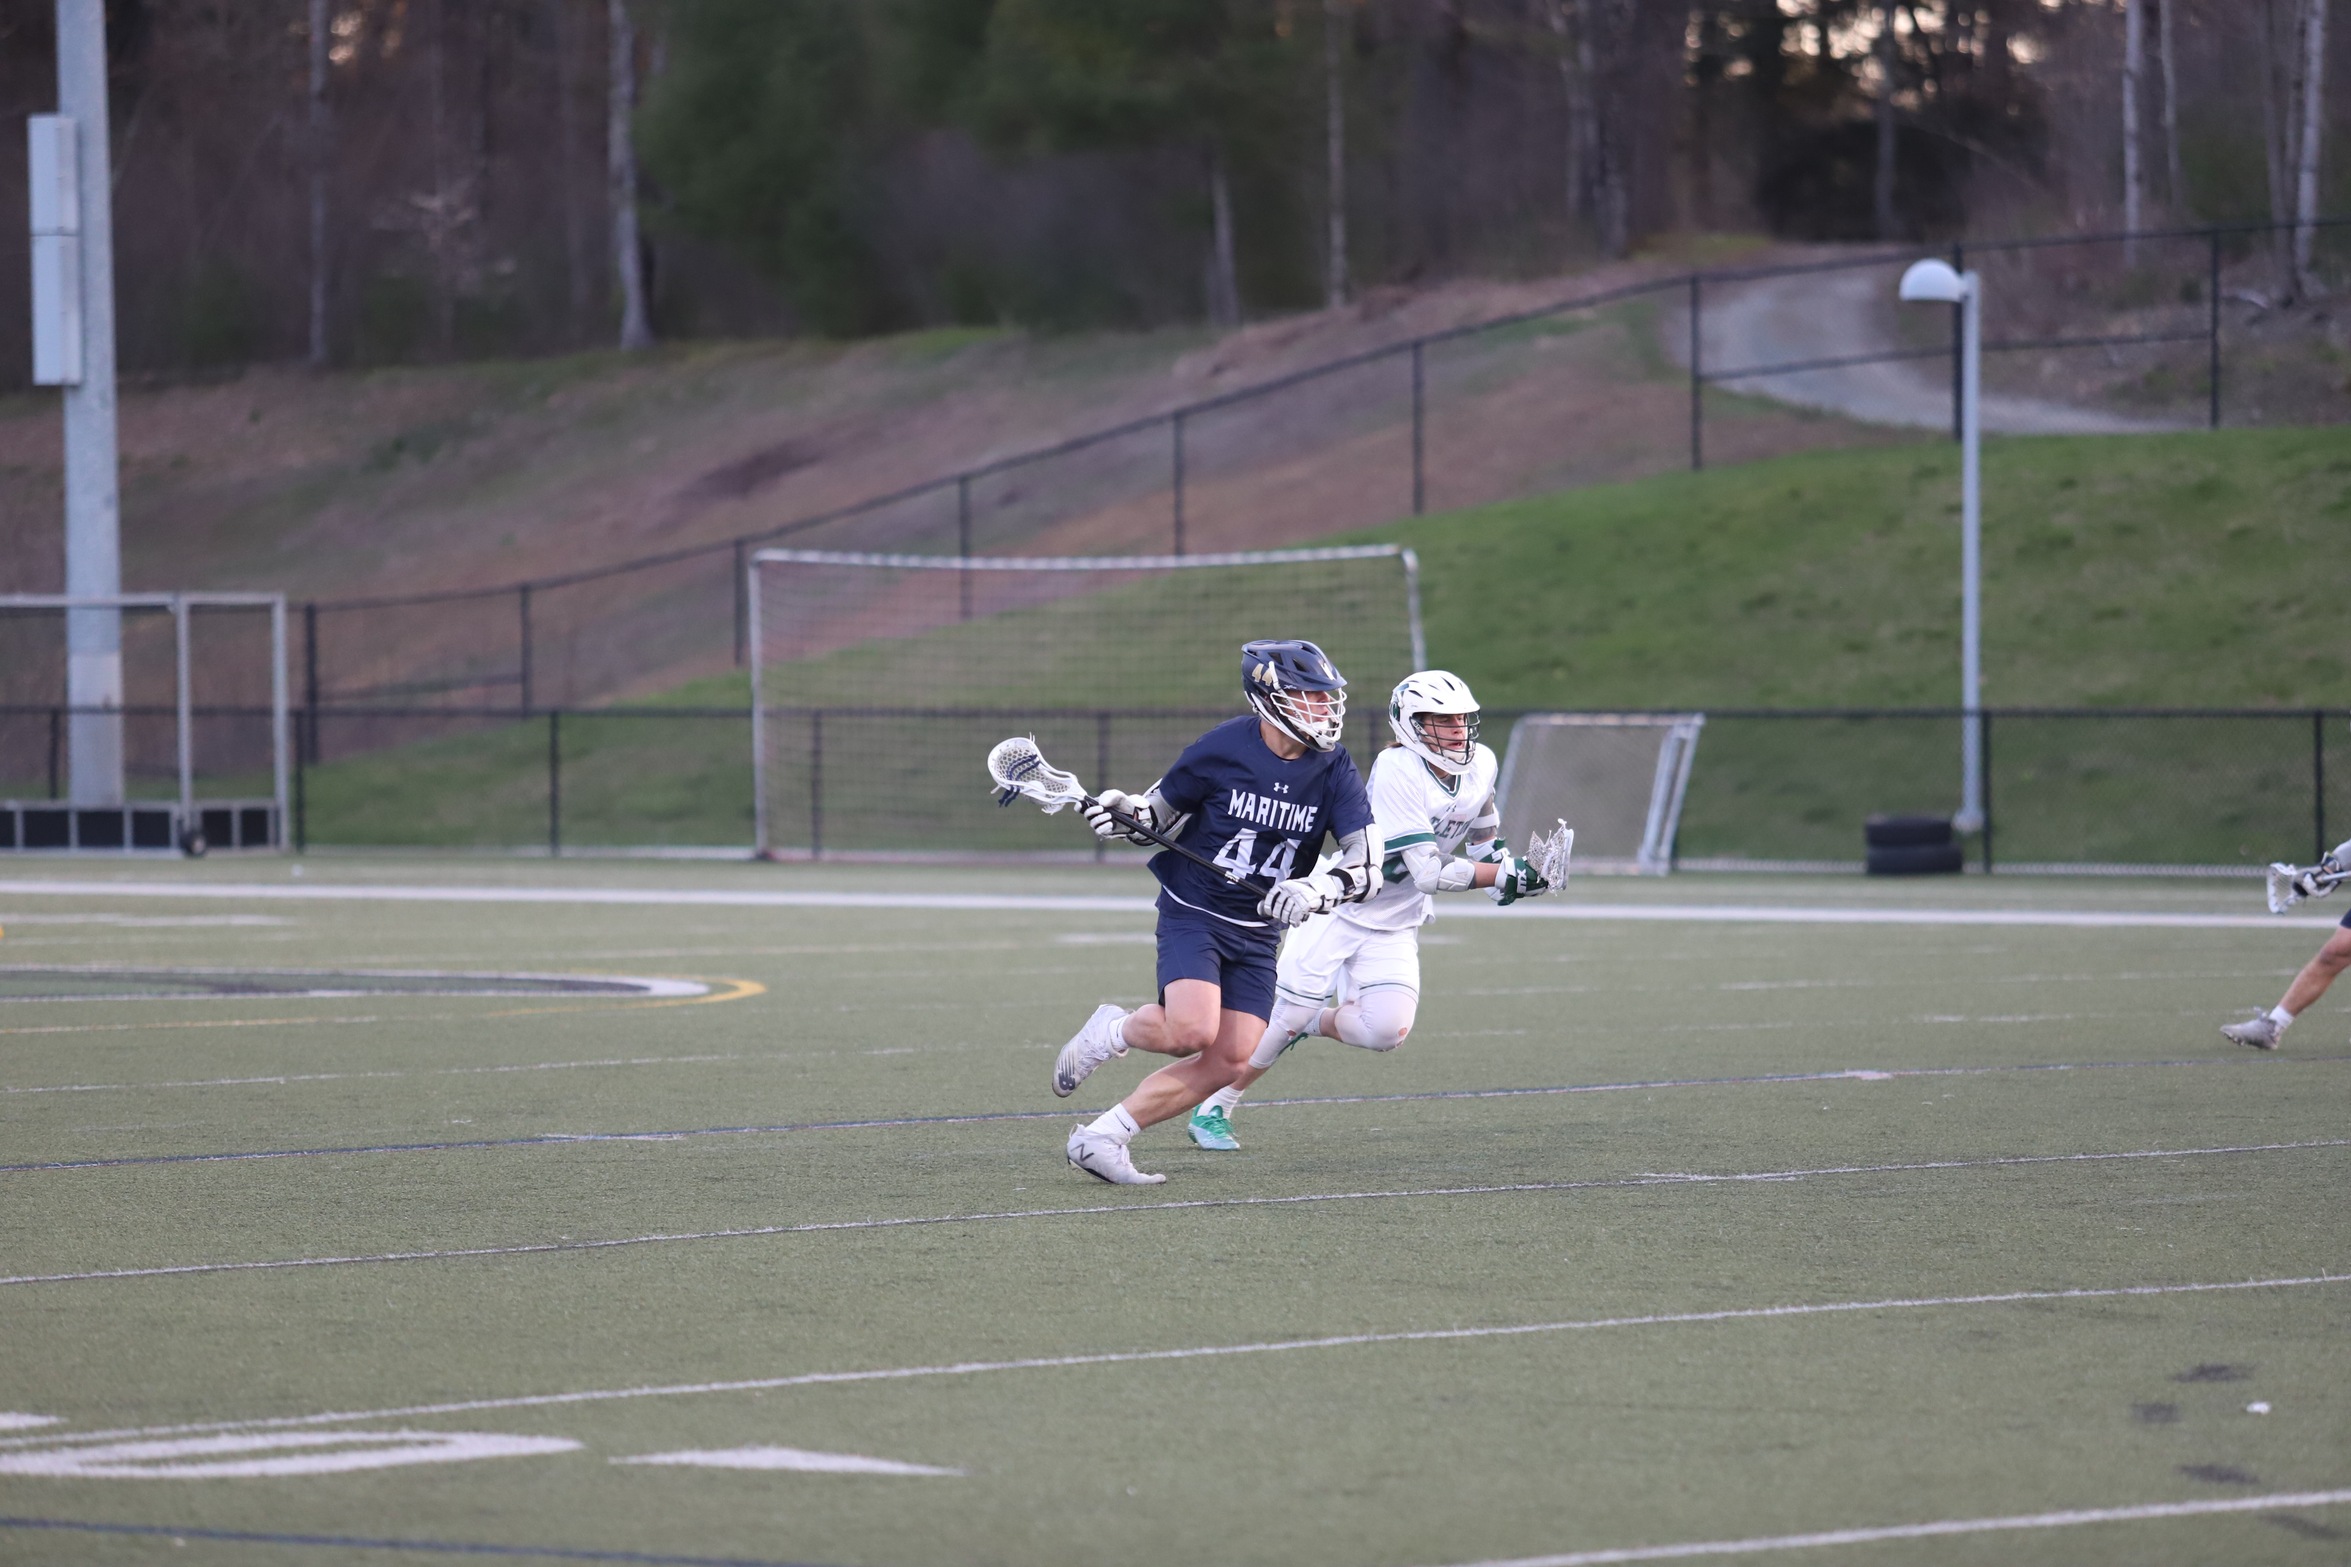 Men's Lax Closes Out Regular Season With Win